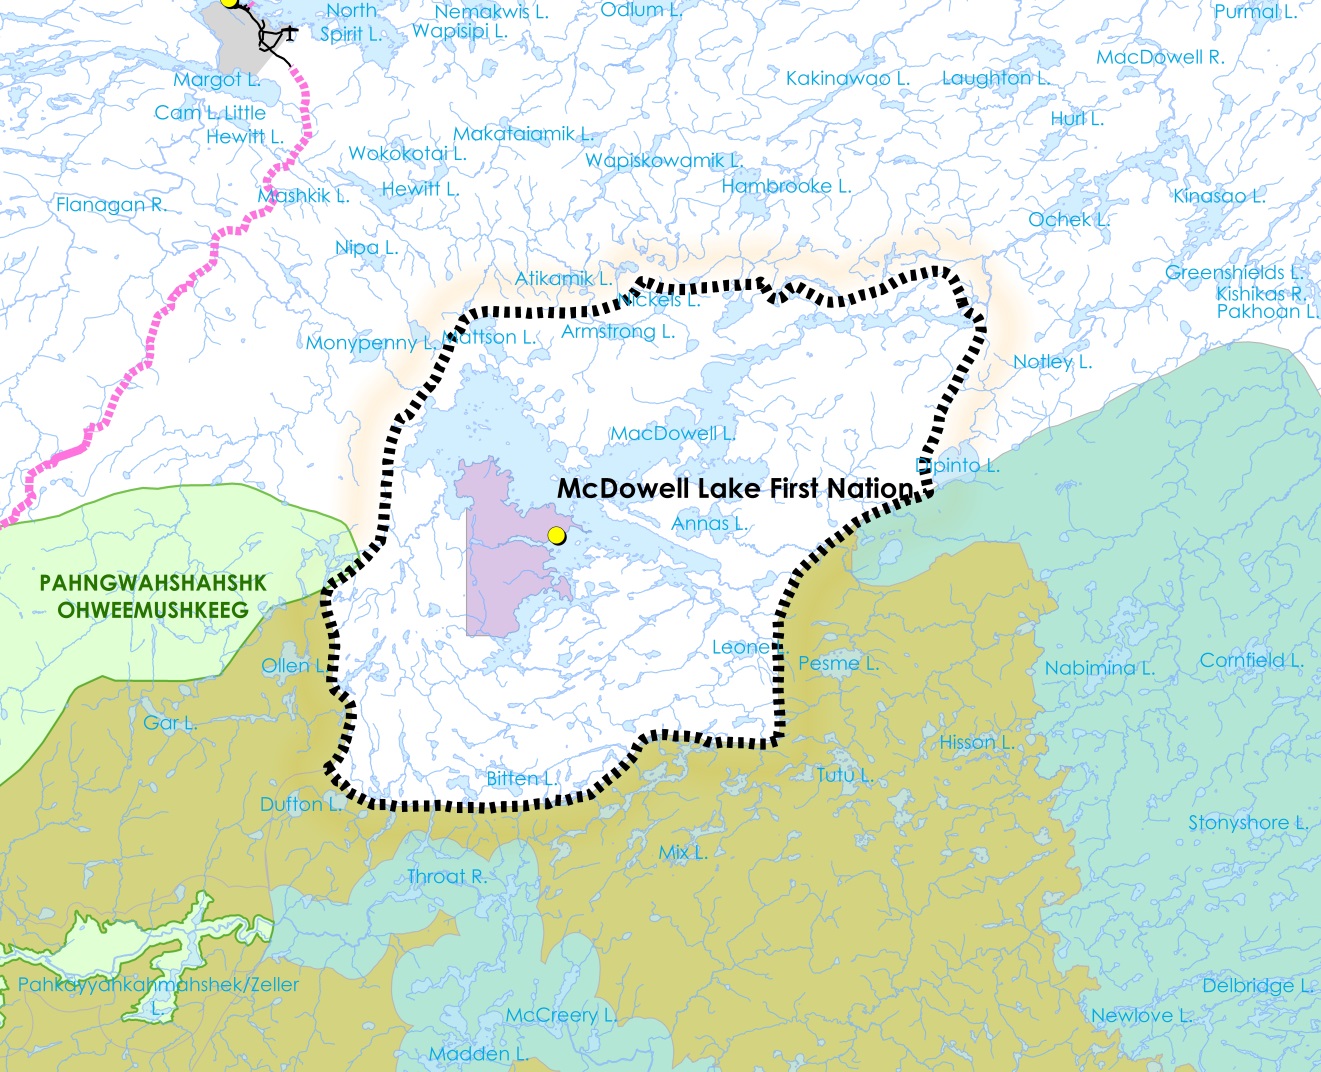 McDowell Lake First Nation Area of Interest for Planning